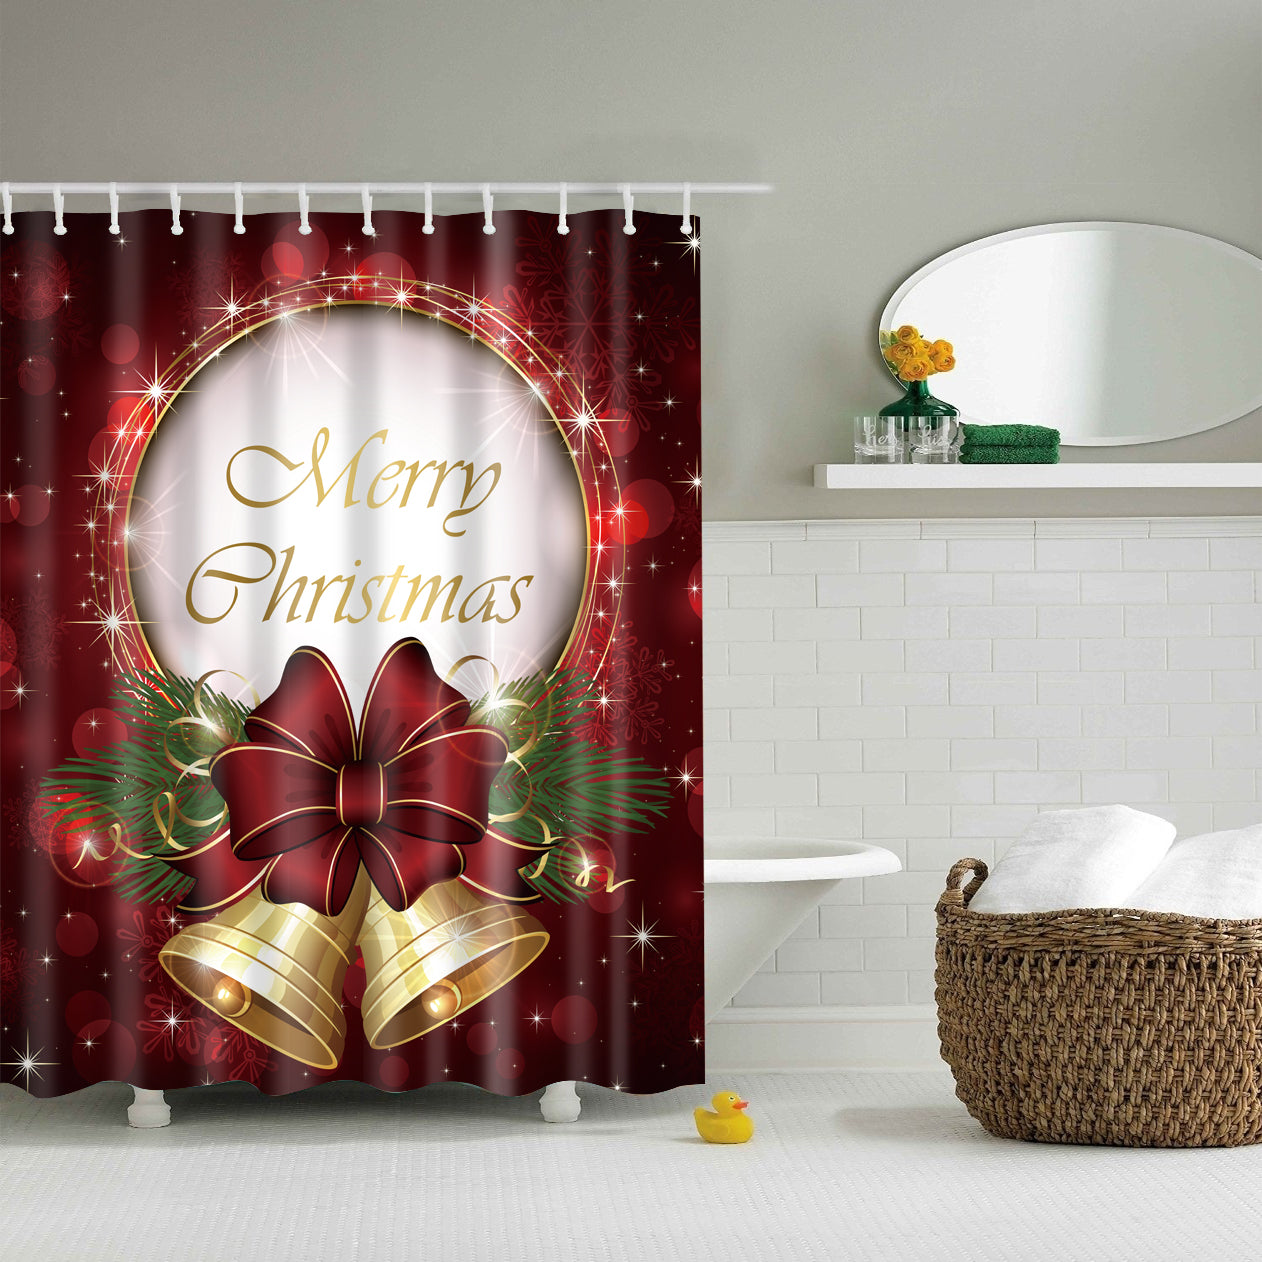 Brown Backdrop High End Christmas Greeting Shower Curtain